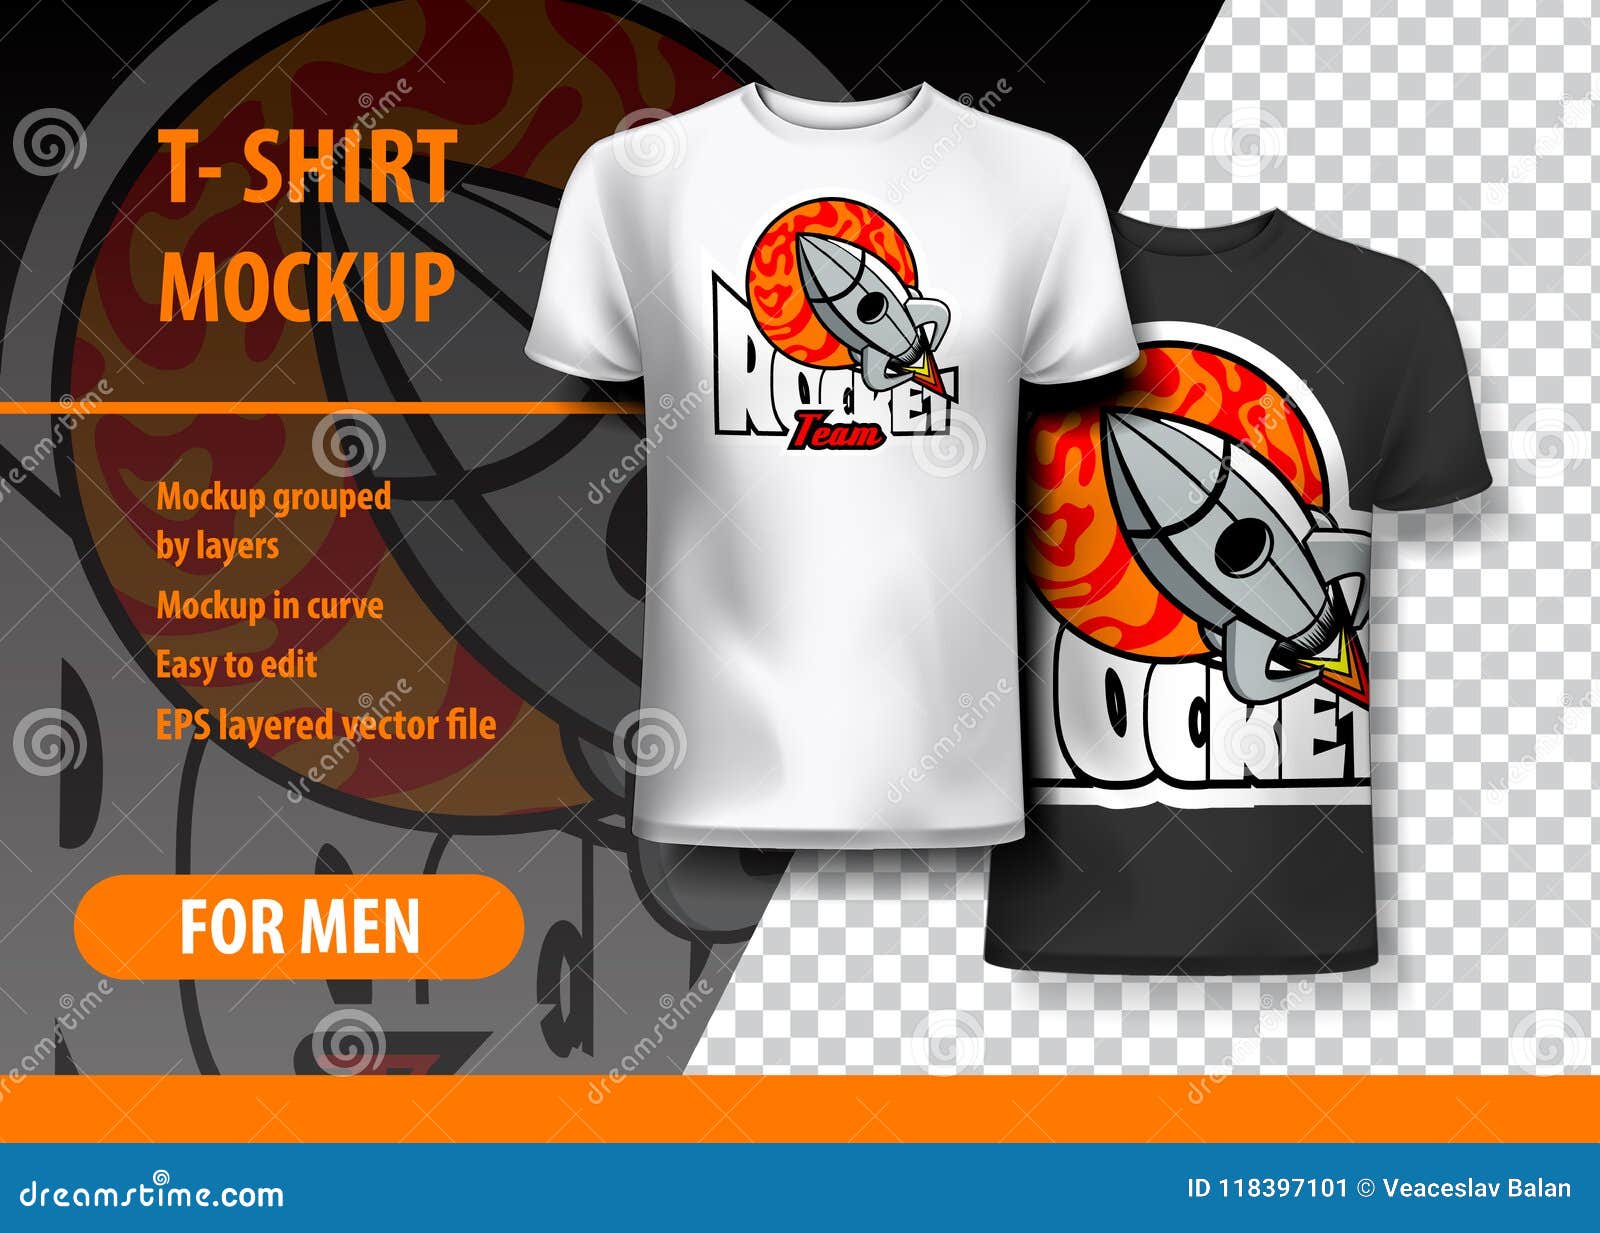 Download T-Shirt Mockup With Rocket Phrase In Two Colors. Mockup ...